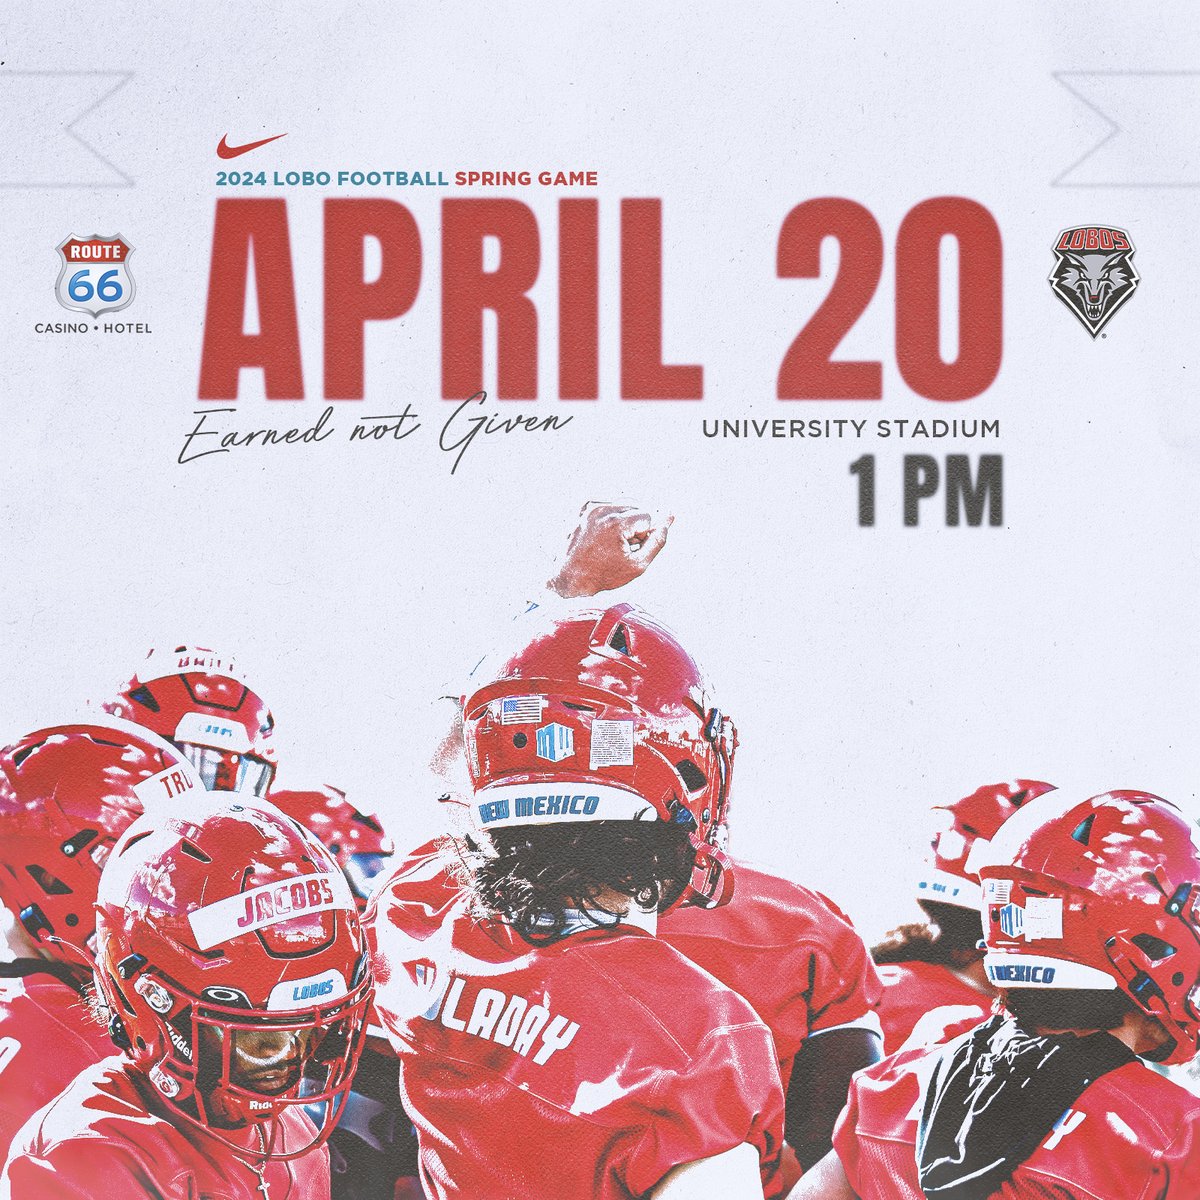 Save the date 📅 Don't miss your first chance to see what Lobo Football is all about. April 20th @ 1:00PM in University Stadium! #GoLobos | #EarnedNotGiven